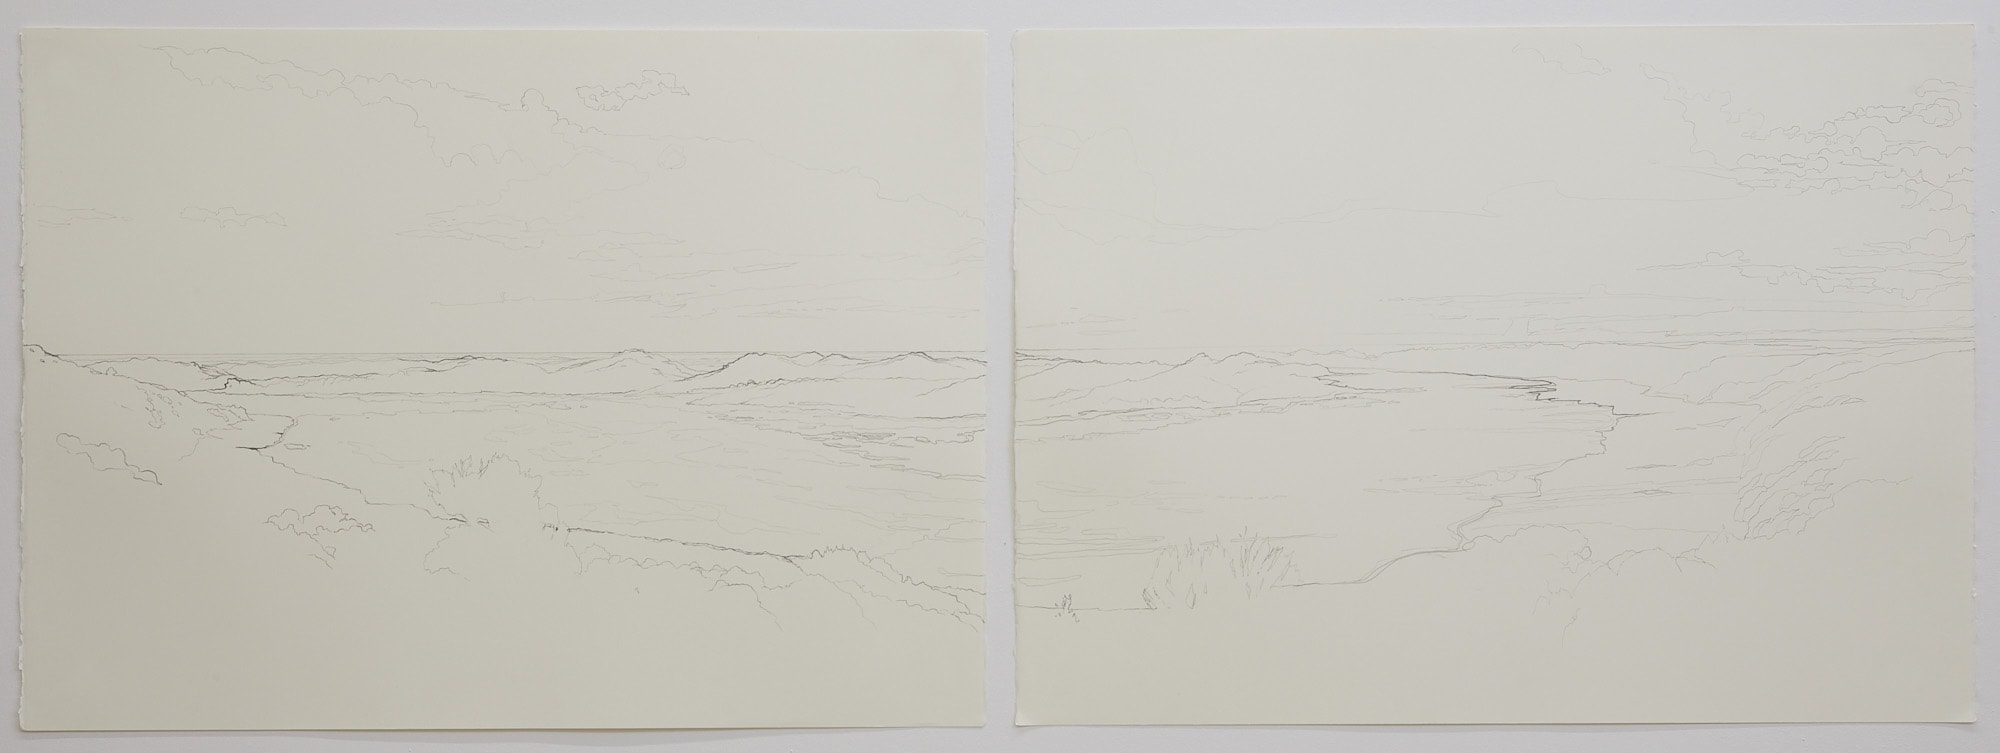 Tower Hill drawing' 2018, pencil on paper, 76 x 56 cm each